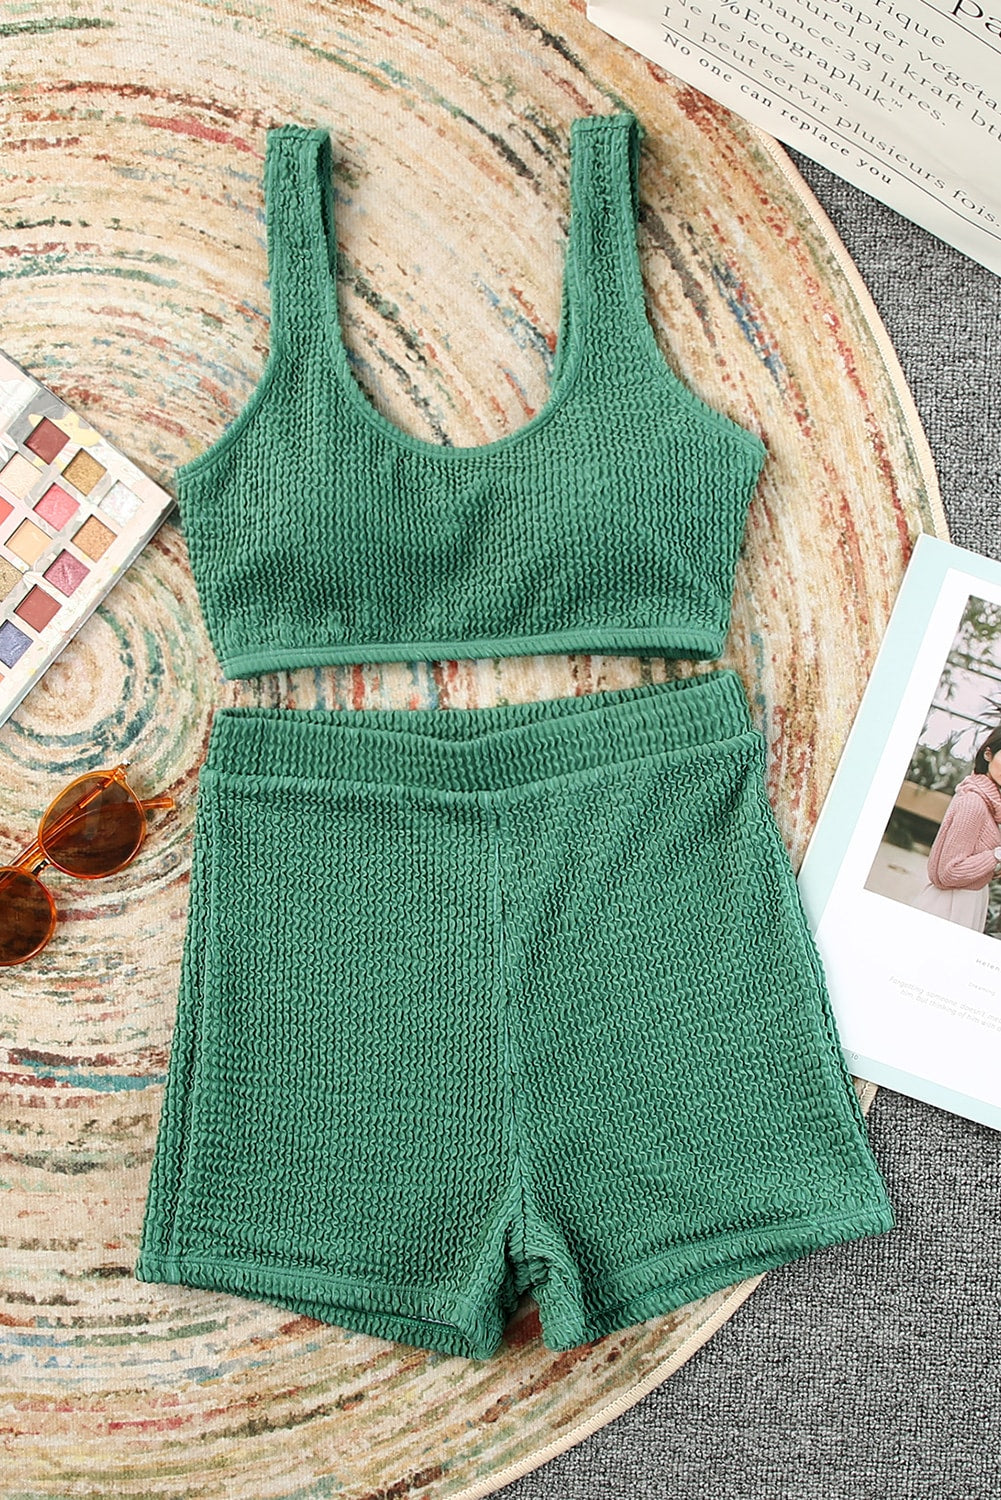 Green Active Textured Sports Bra and Shorts Set